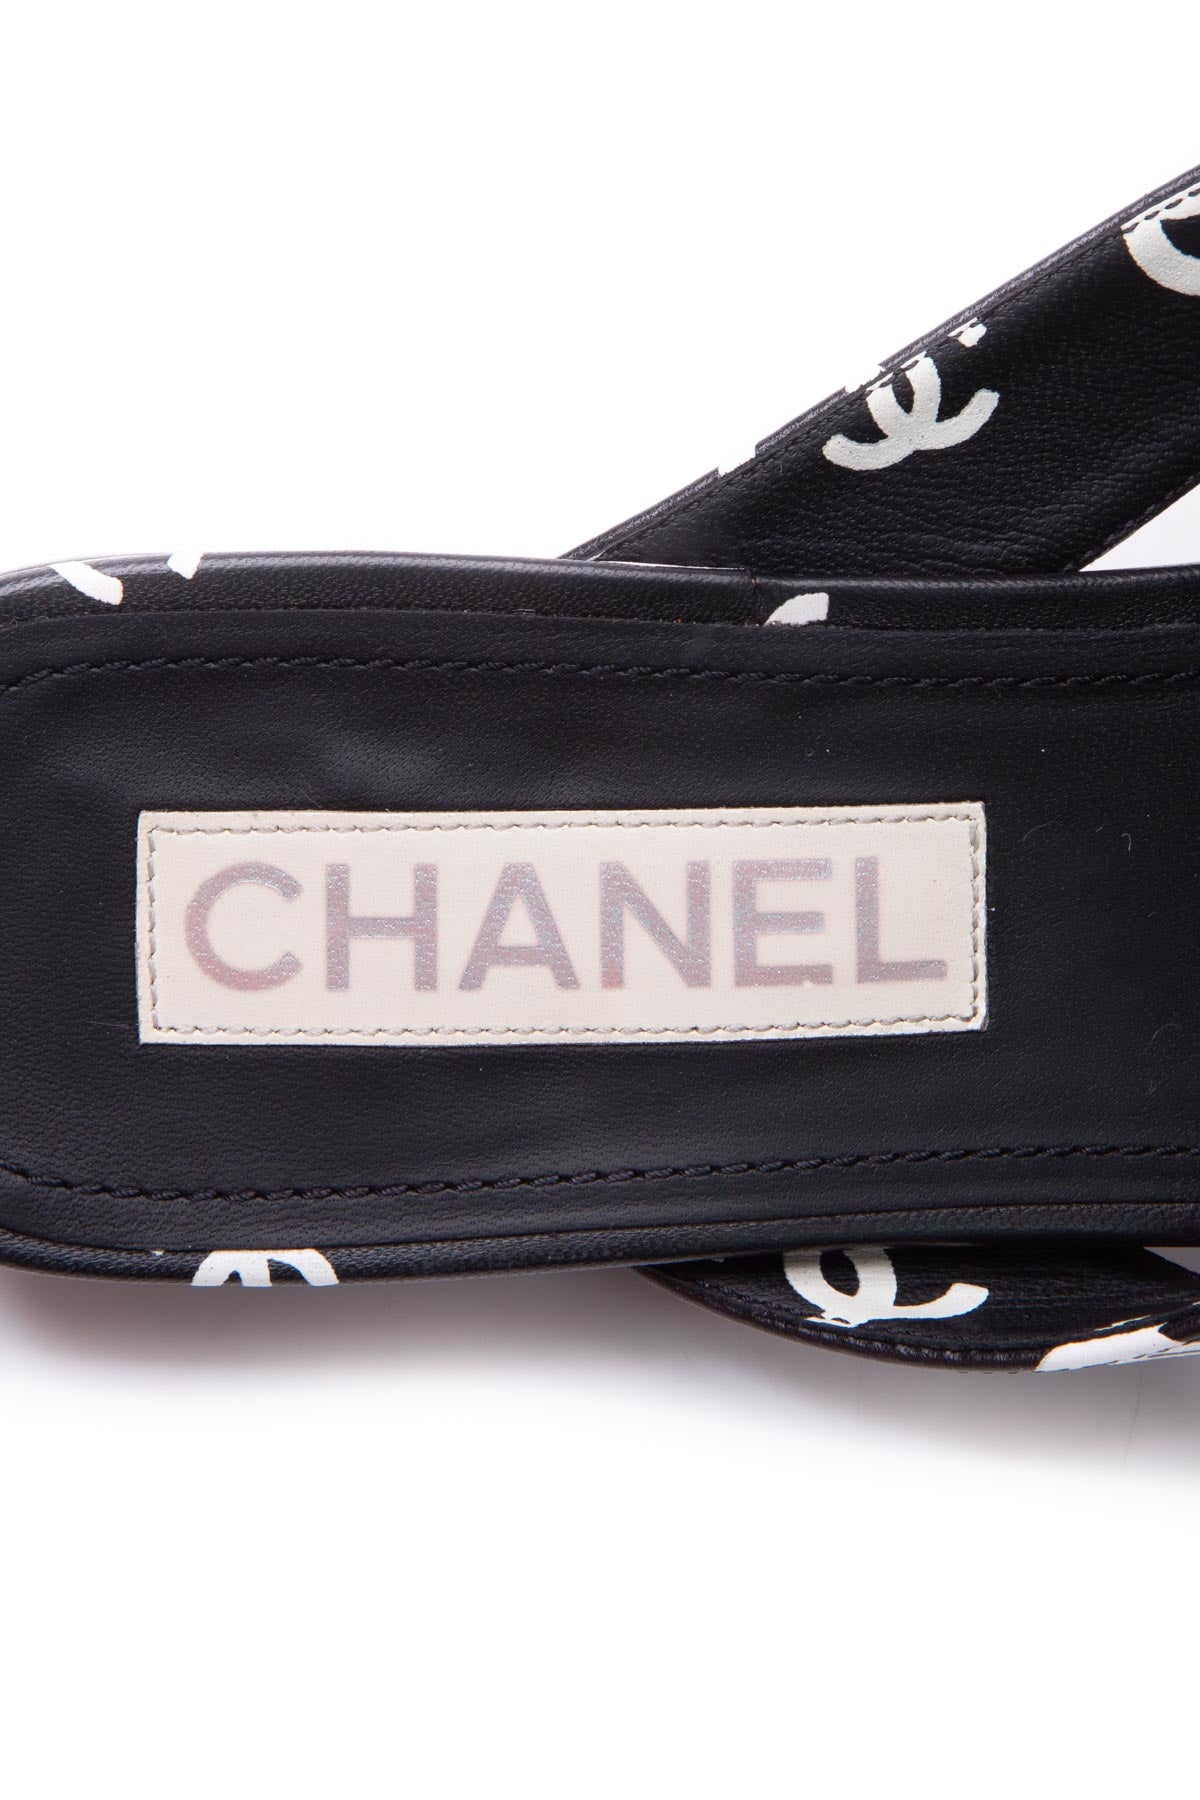 CHANEL, Shoes, Chanel Dad Sandals Peony Hair